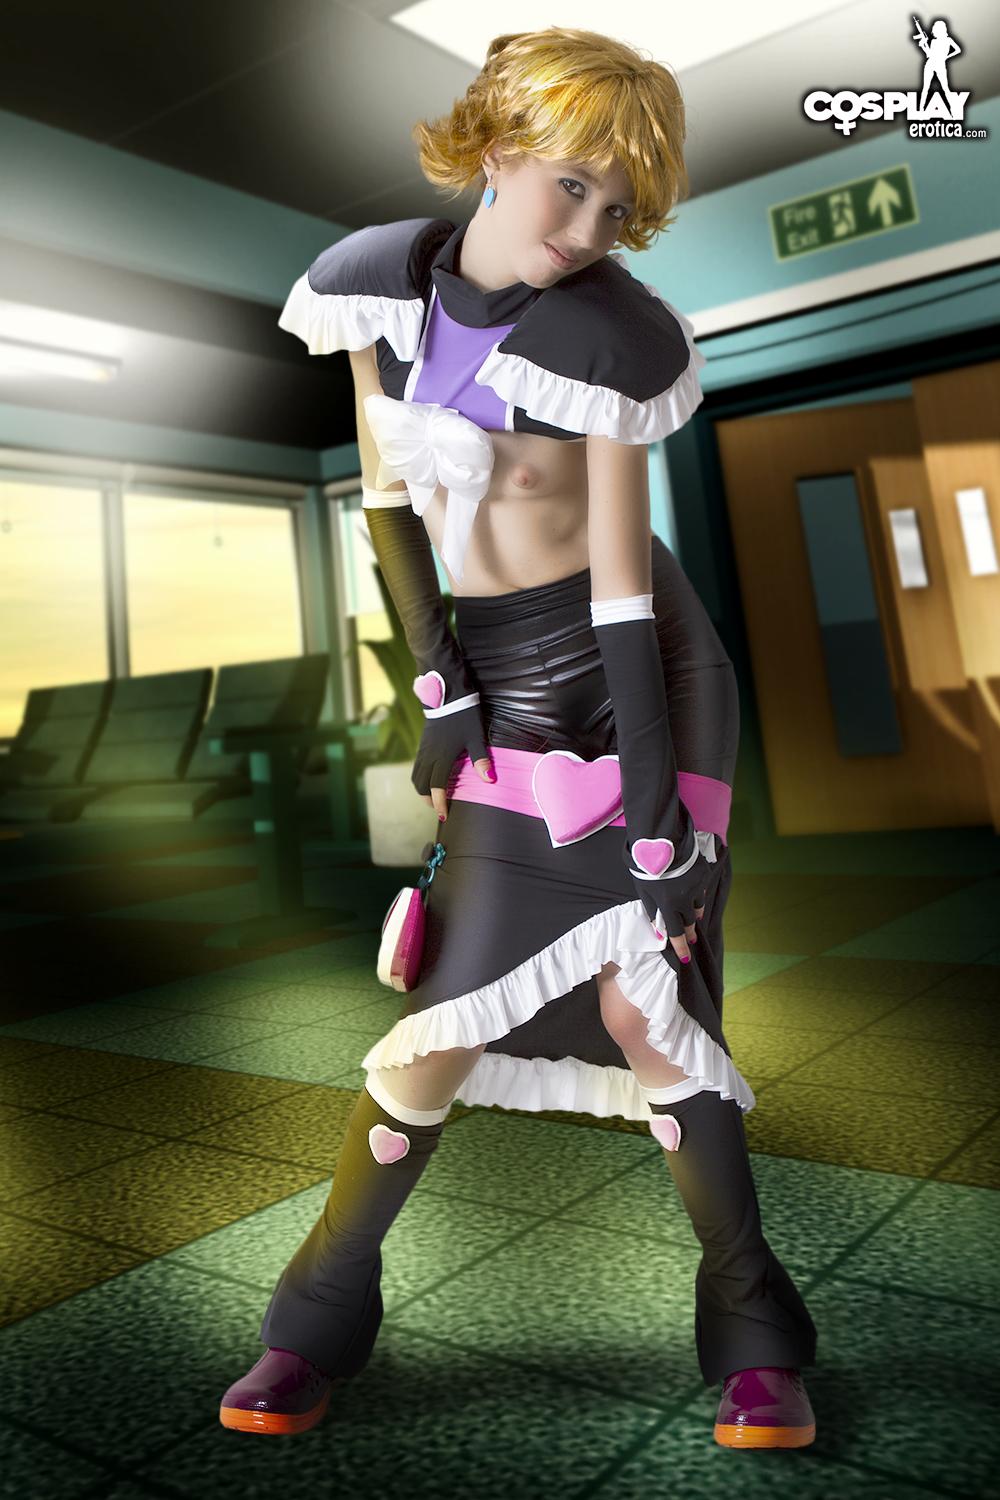 Cosplay hottie stacy strisce in un set anime sexy
 #60007695